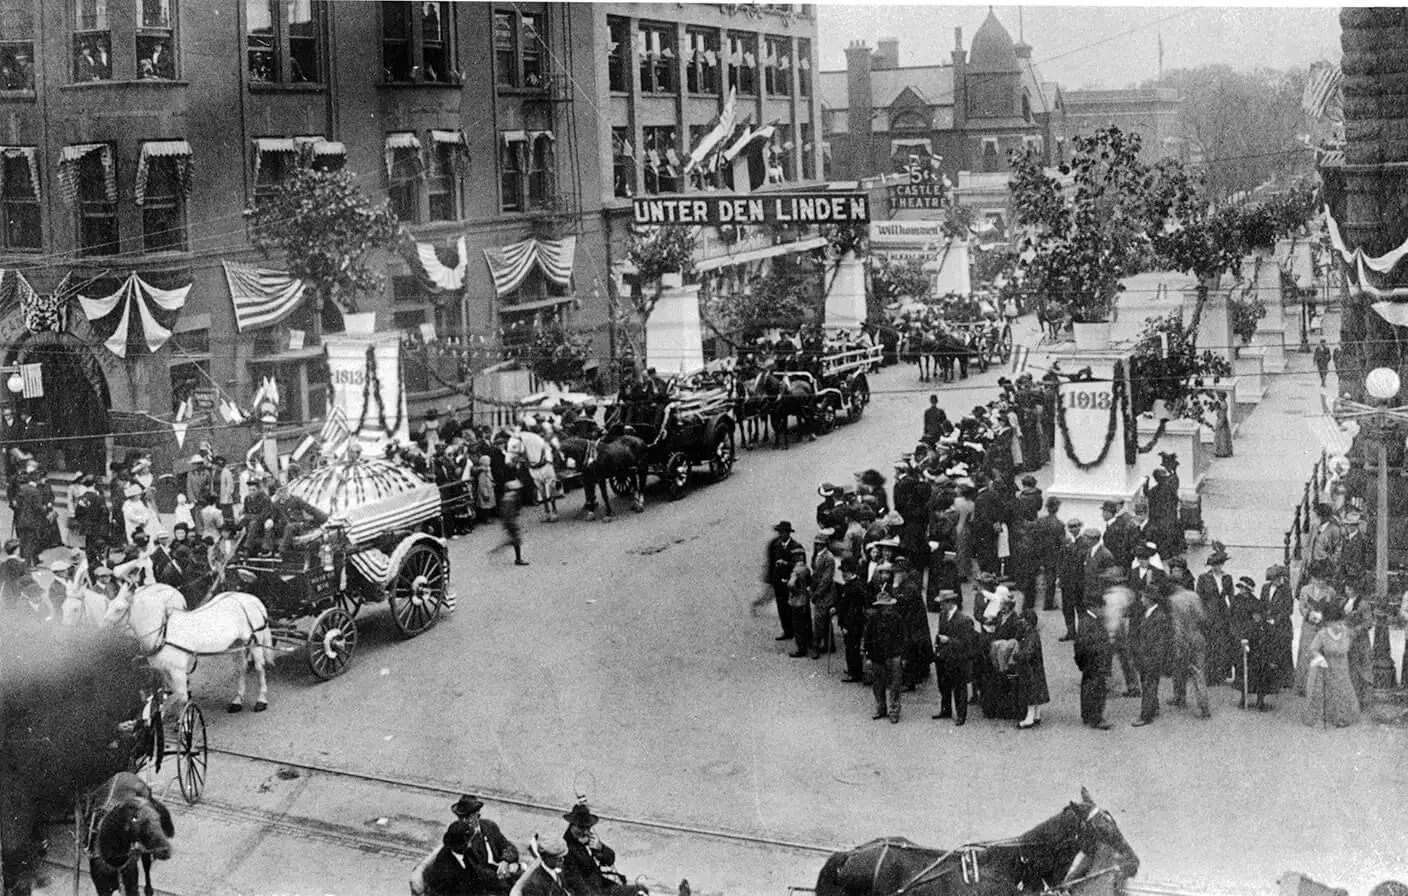 Photo of a large crowd lining the street, watching a parade of horsedrawn wagons decorated as floats. There is bunting displayed on some of the buildings along the parade route.